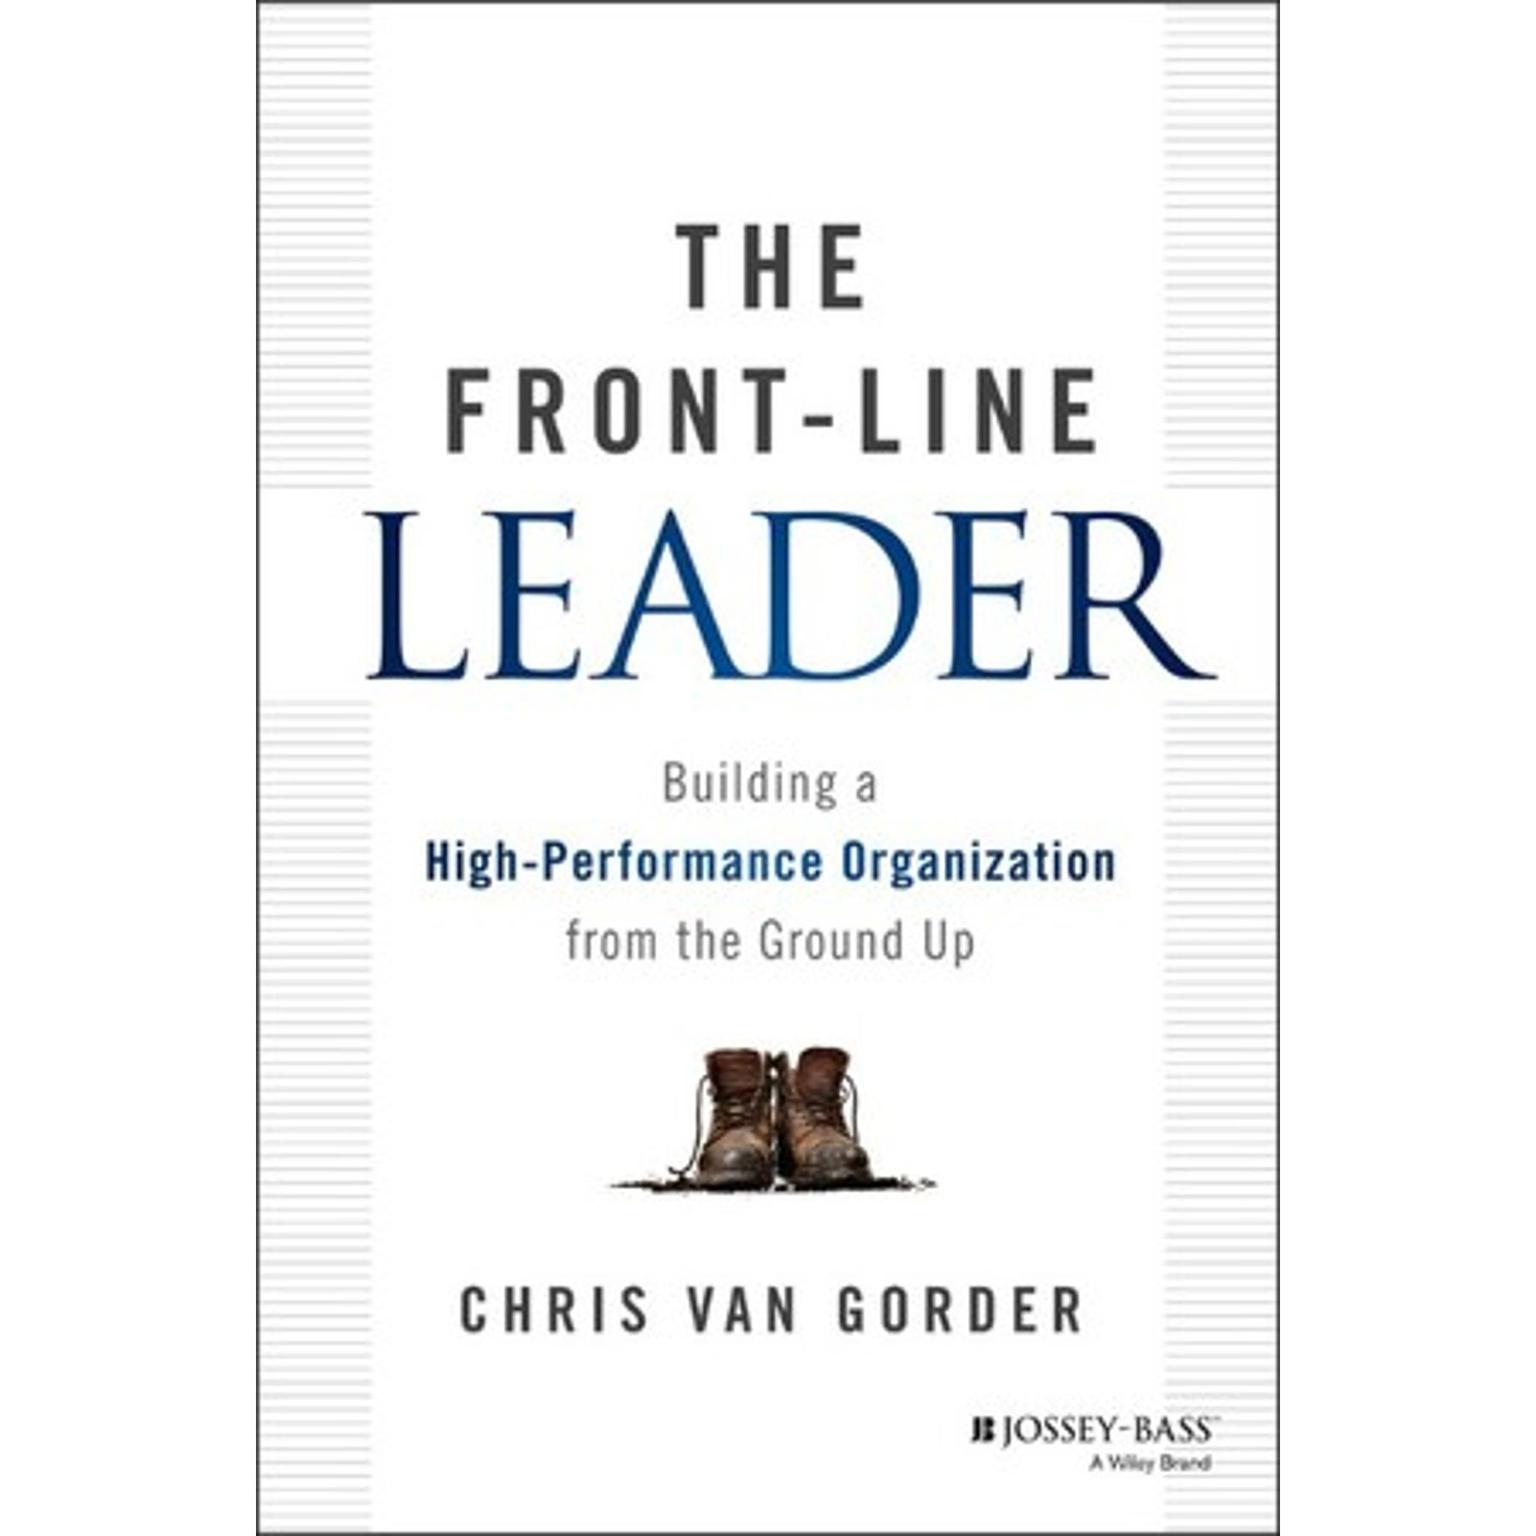 The Front-Line Leader: Building a High-Performance Organization from the Ground Up Audiobook, by Chris Van Gorder